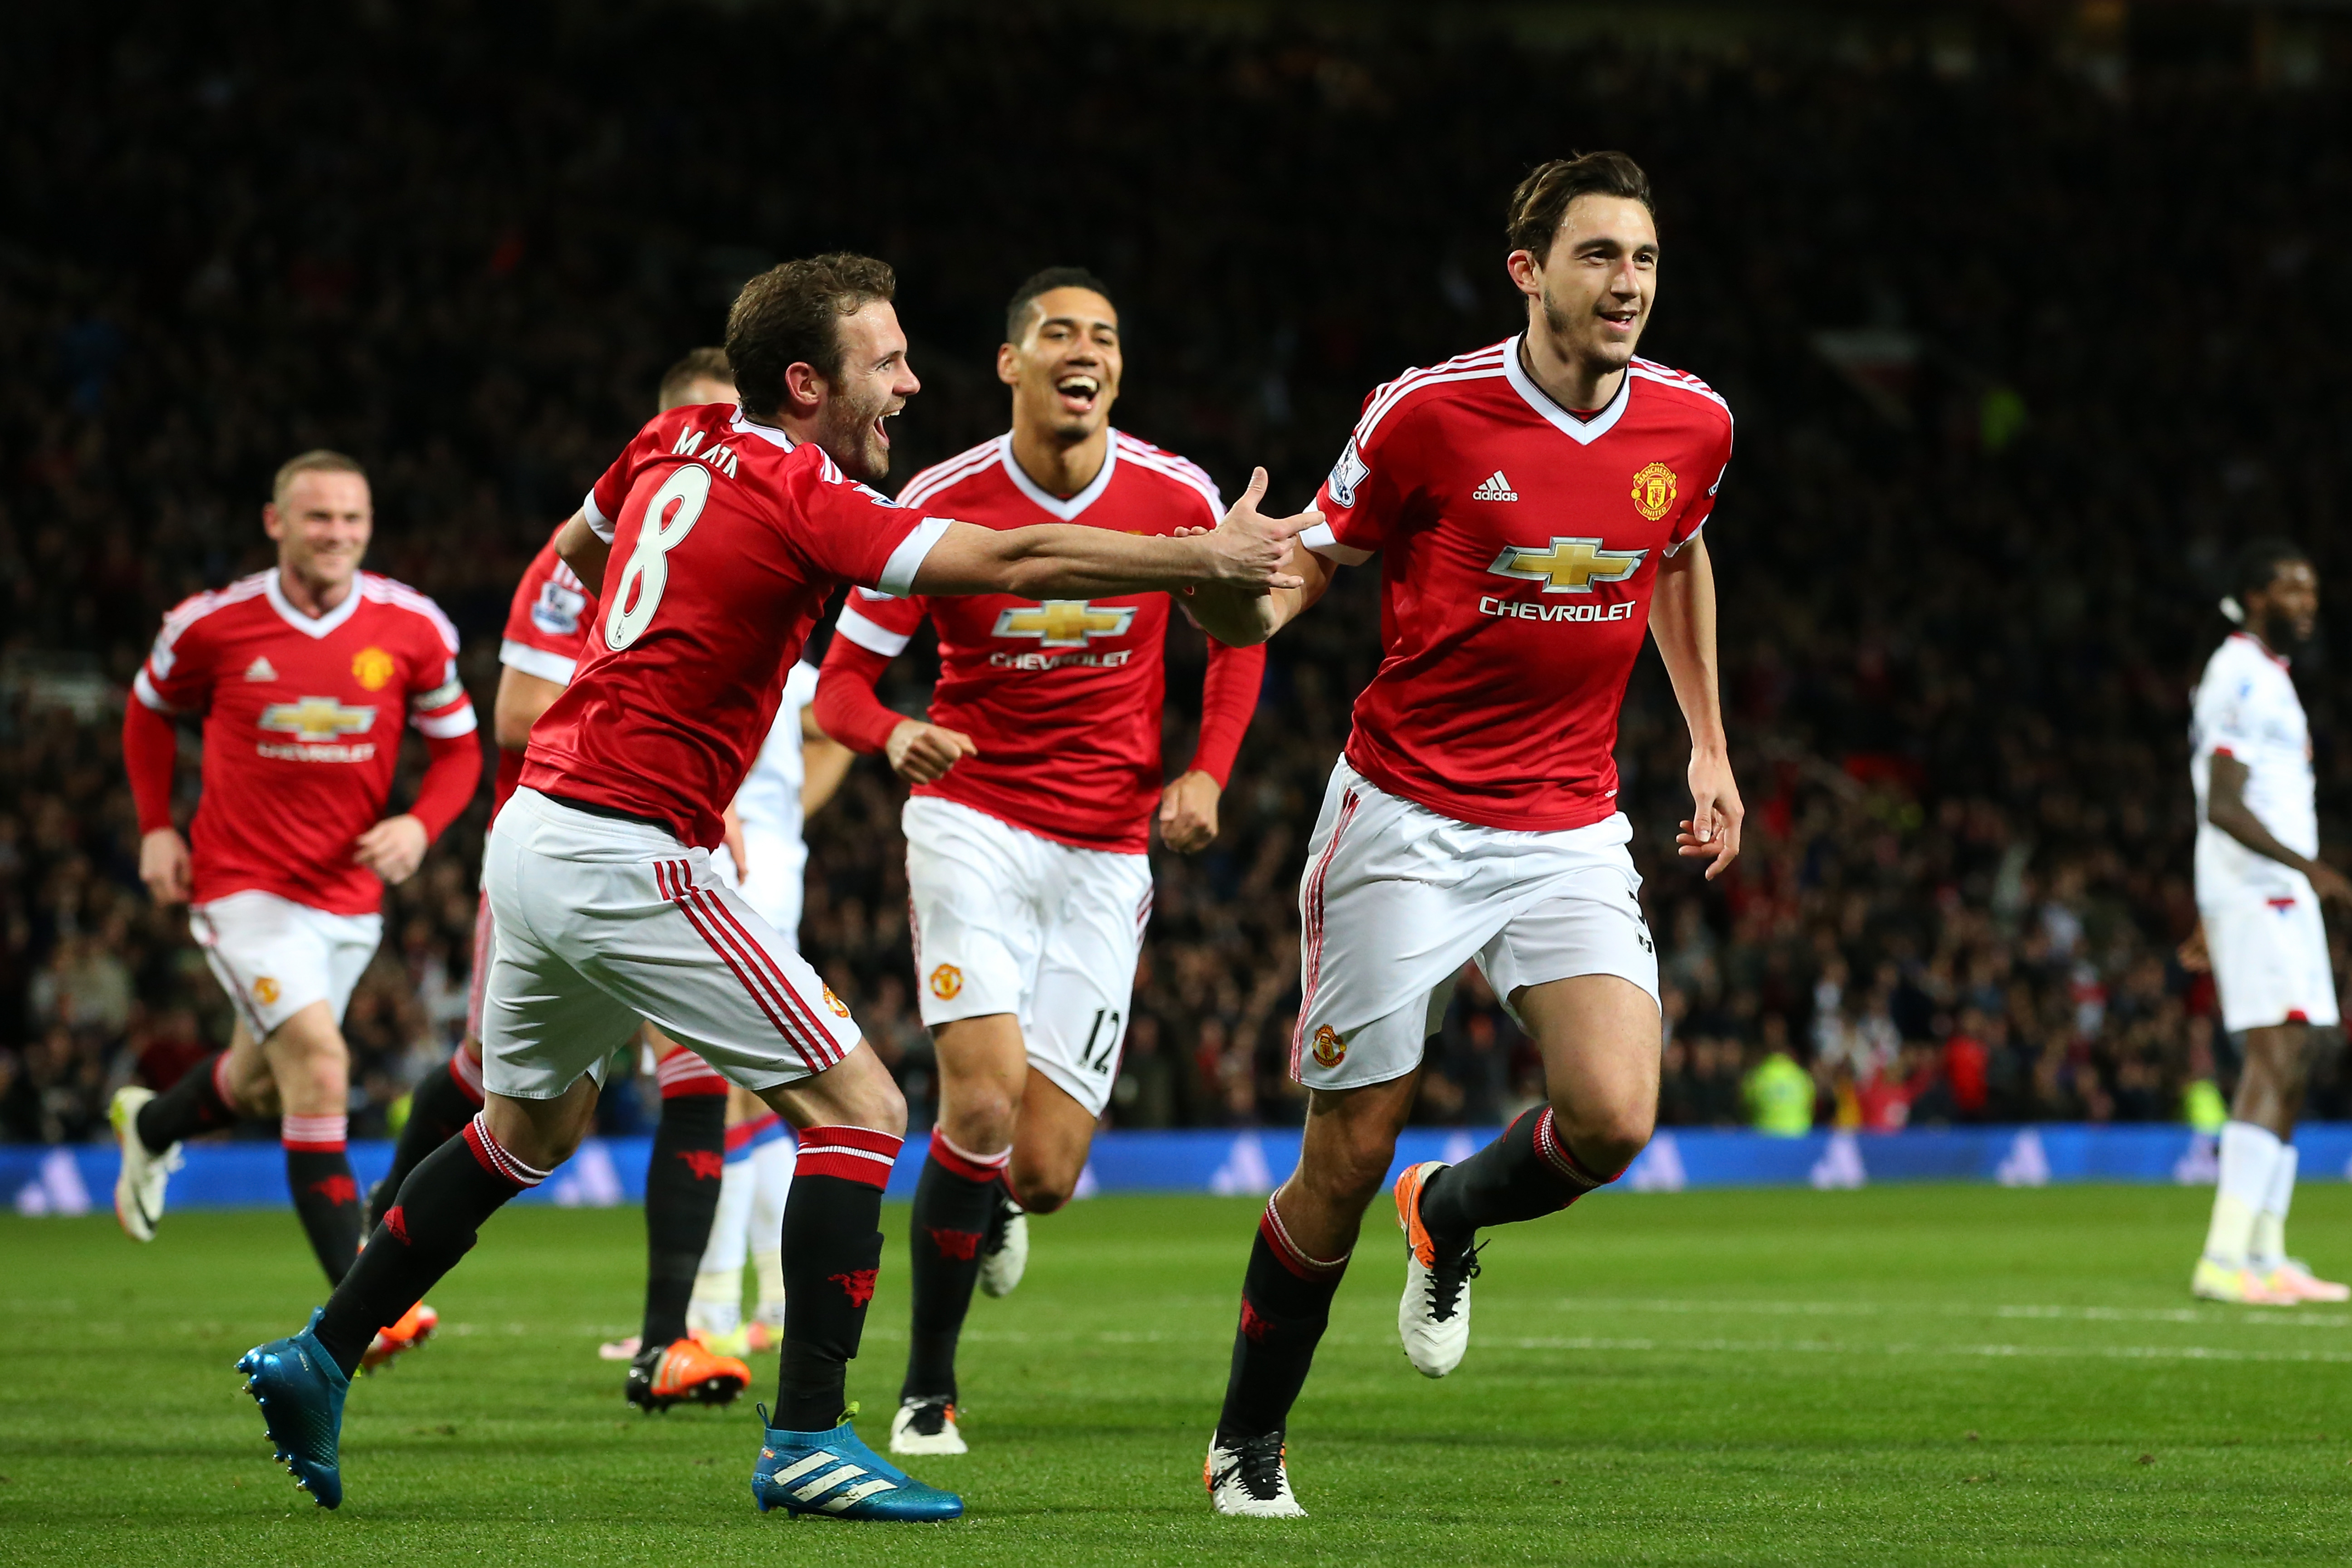 MANCHESTER, ENGLAND - APRIL 20:  Matteo Darmian of Manchester United celebrates with team mates after scoring his sides second goal during the Barclays Premier League match between Manchester United and Crystal Palace at Old Trafford on April 20, 2016 in Manchester, England.  (Photo by Alex Livesey/Getty Images)